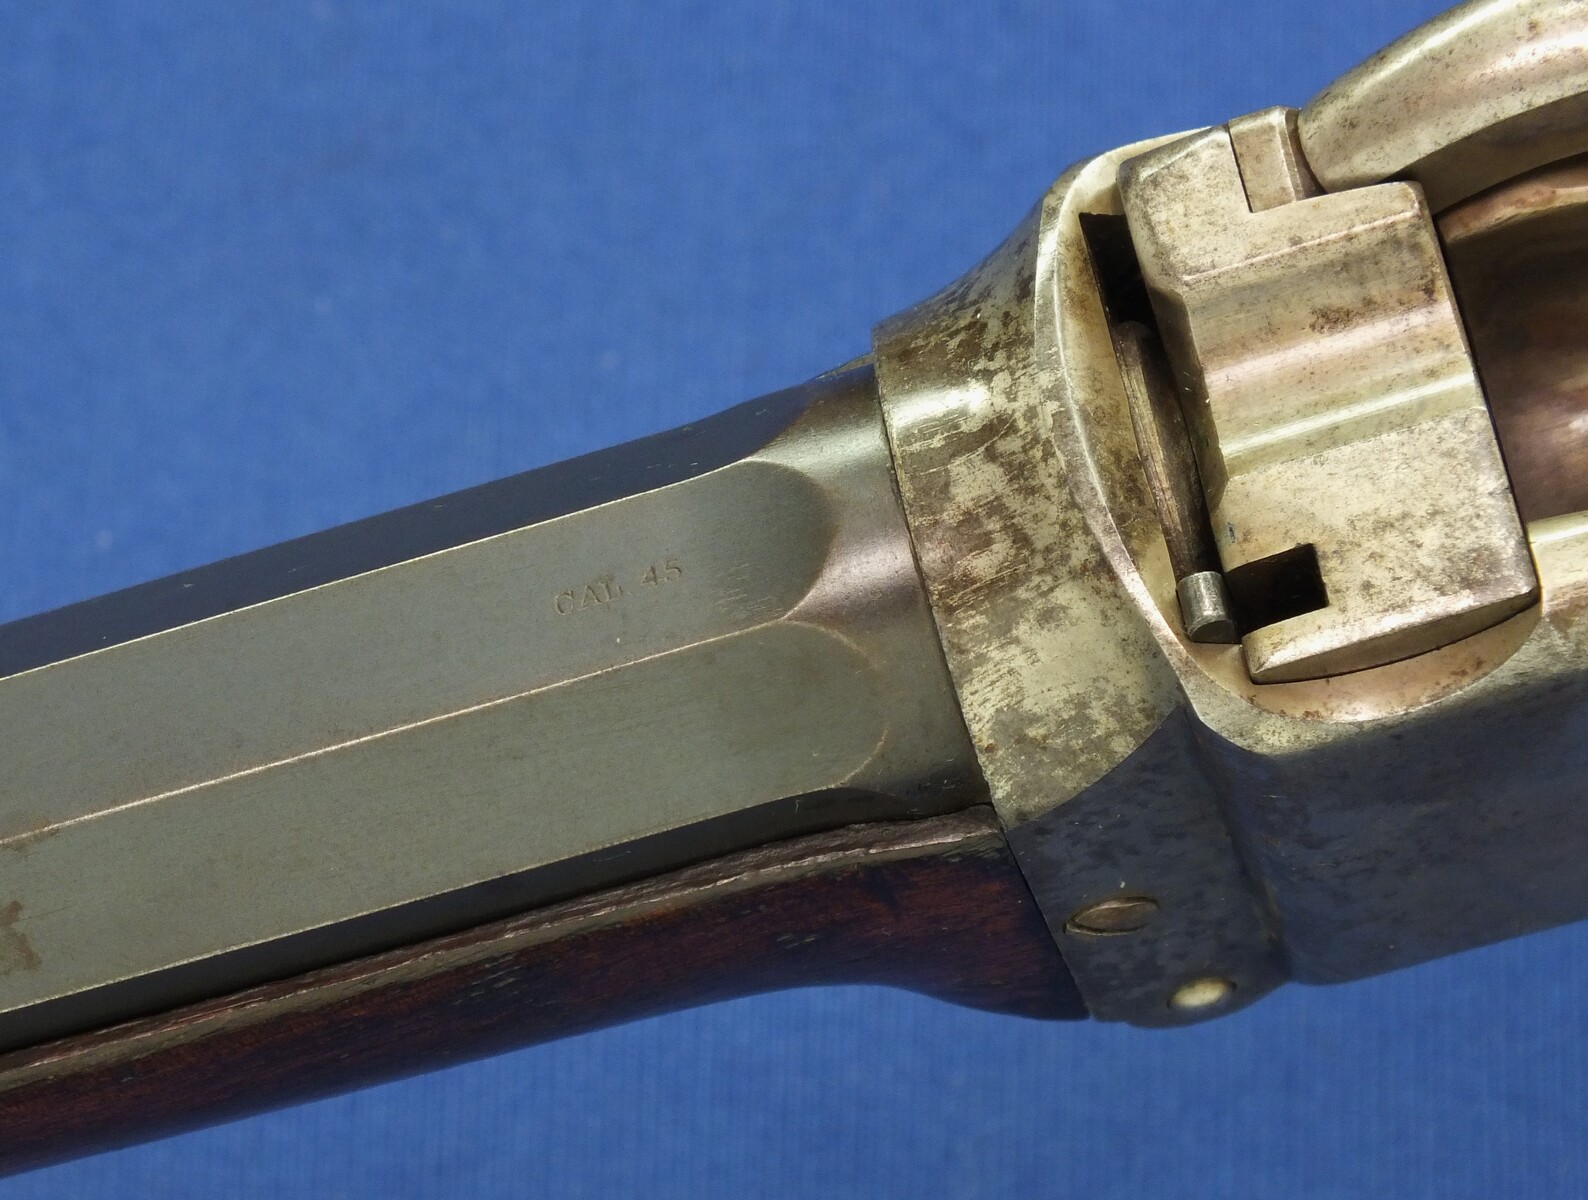 A fine American Sharps Model 1874 Sporting Rifle with Double-set triggers. Caliber 45-70. 30 inch full octagonal barrel of 6 pounds, 6 ounces. Made 1878-80. Length 120cm. In very good condition. 